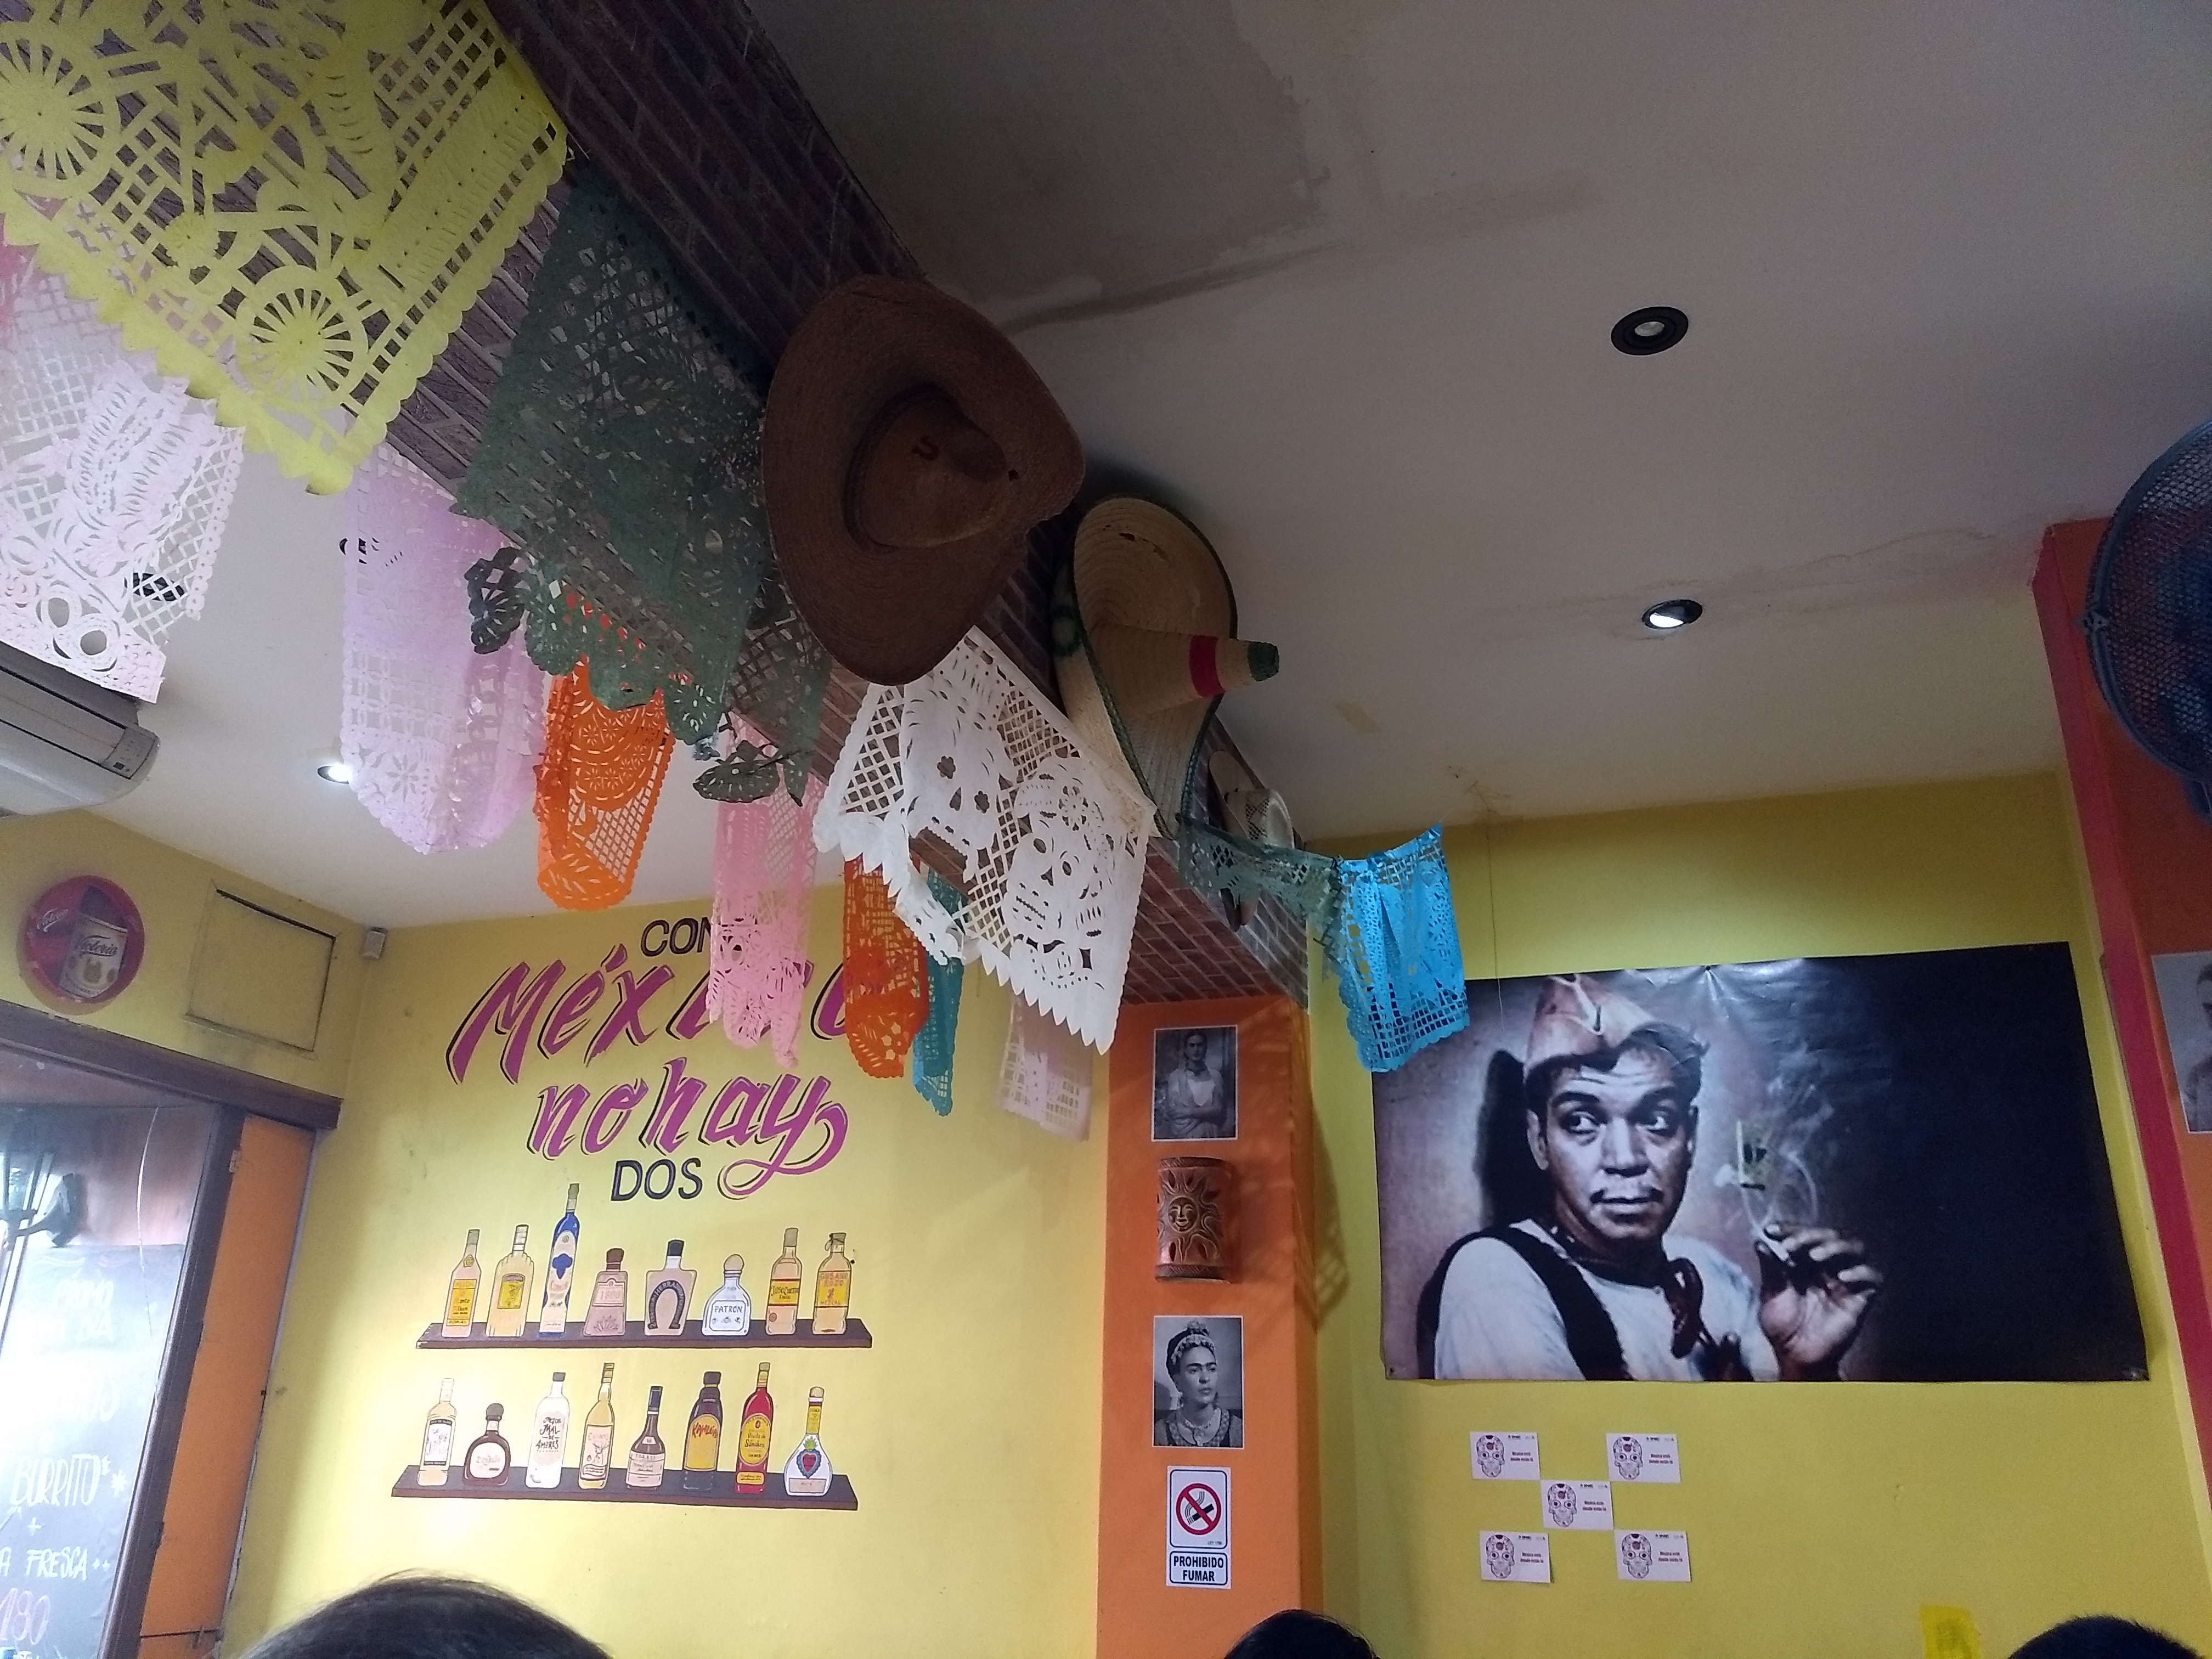 Remembering a trip to a Mexican food place — Steemkr